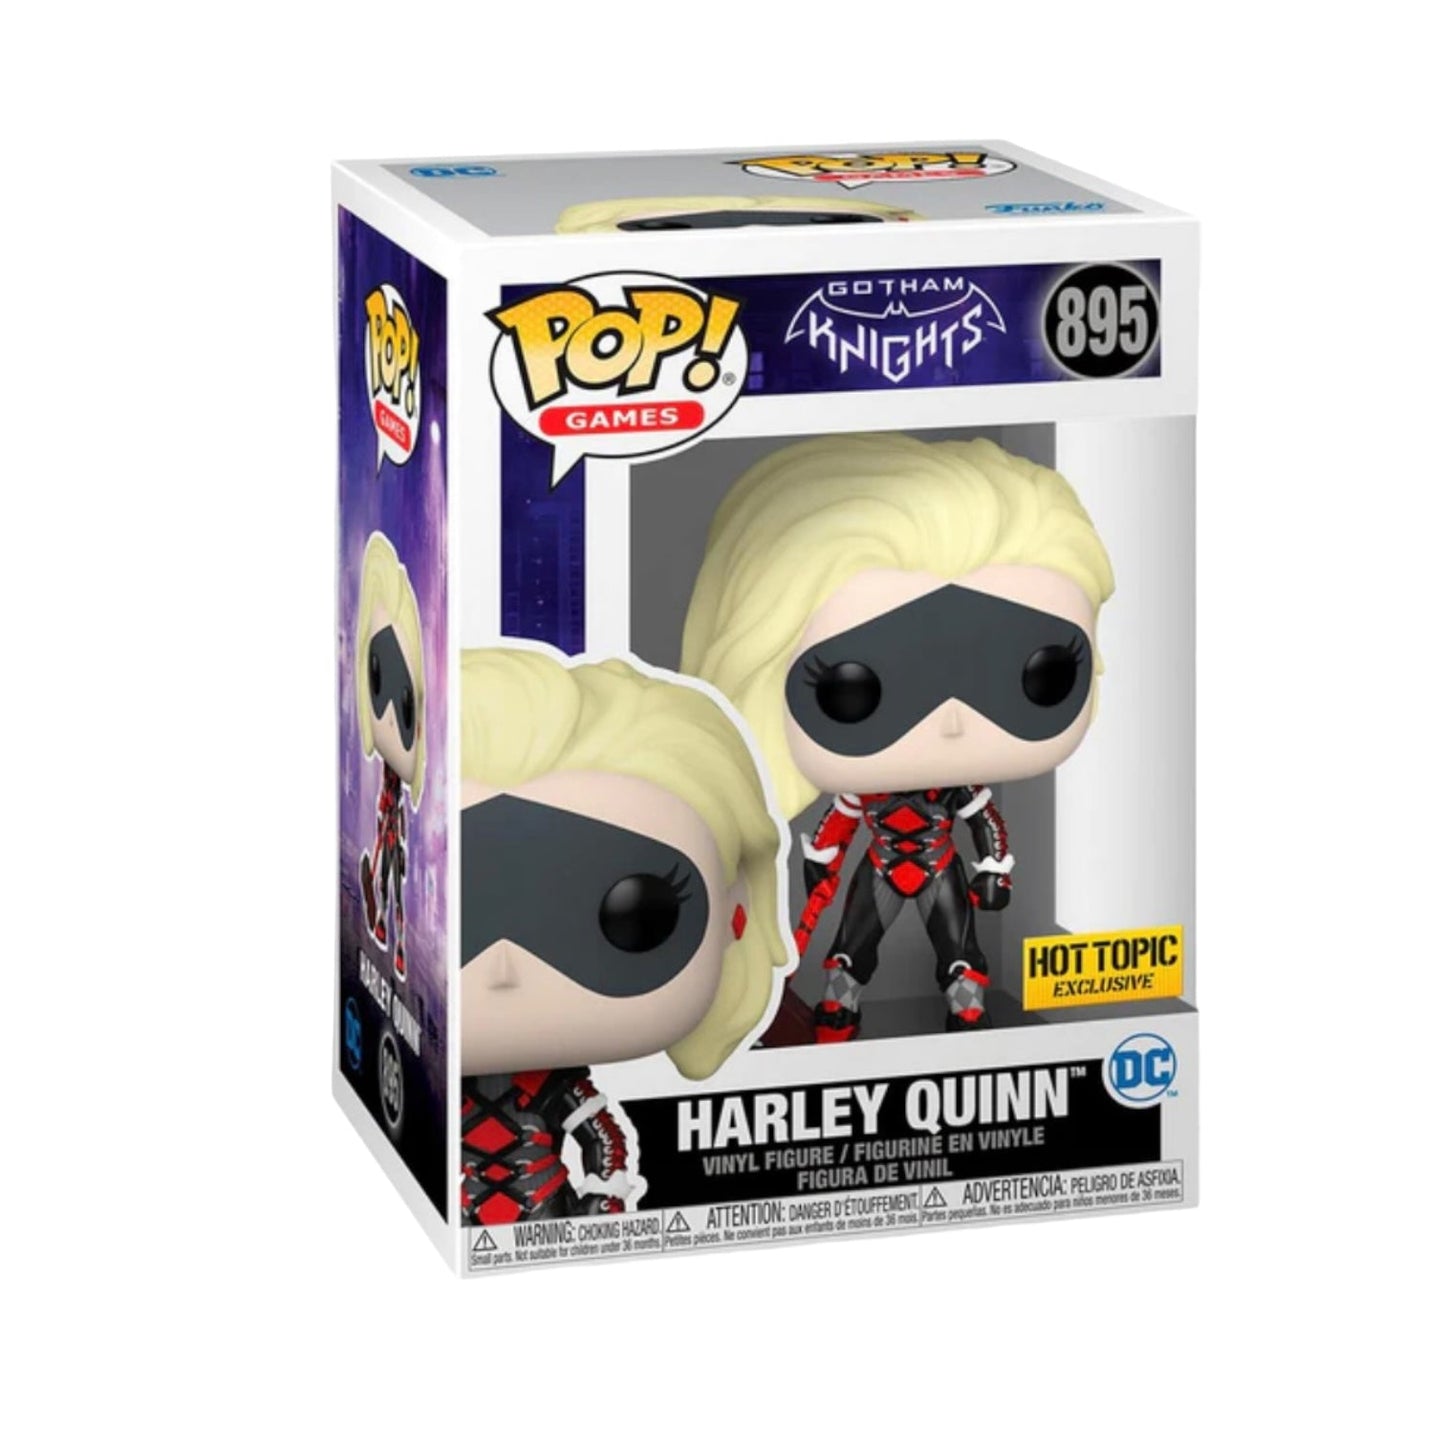 Harley Quinn #895 Funko Pop! - Gotham Knights - Hot Topic Exclusive - Angry Cat